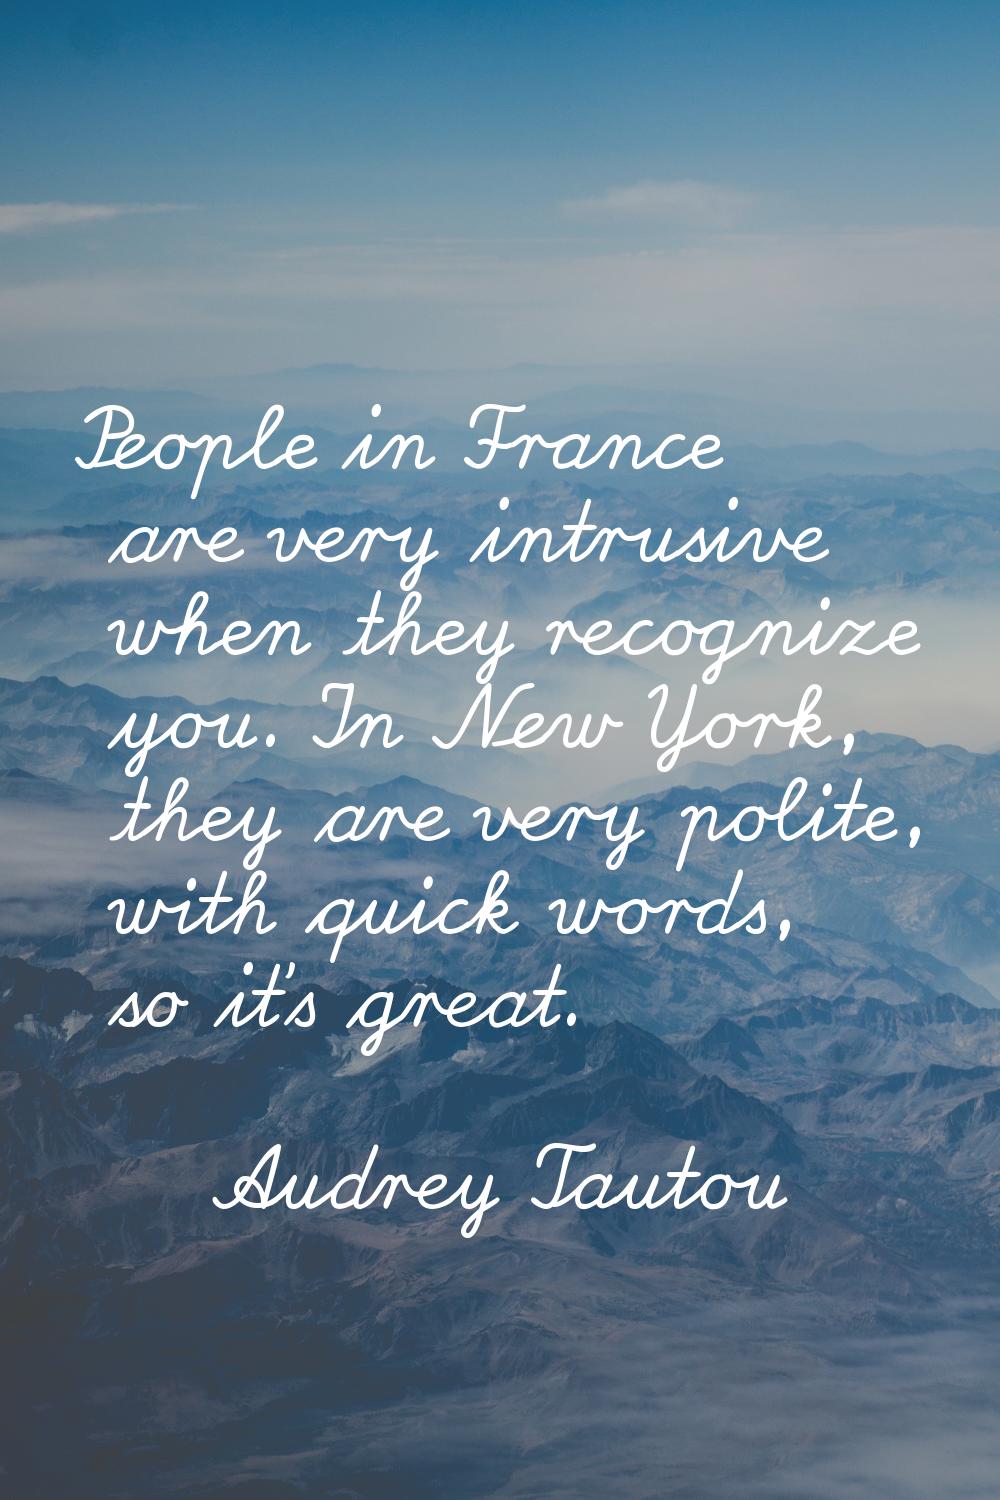 People in France are very intrusive when they recognize you. In New York, they are very polite, wit